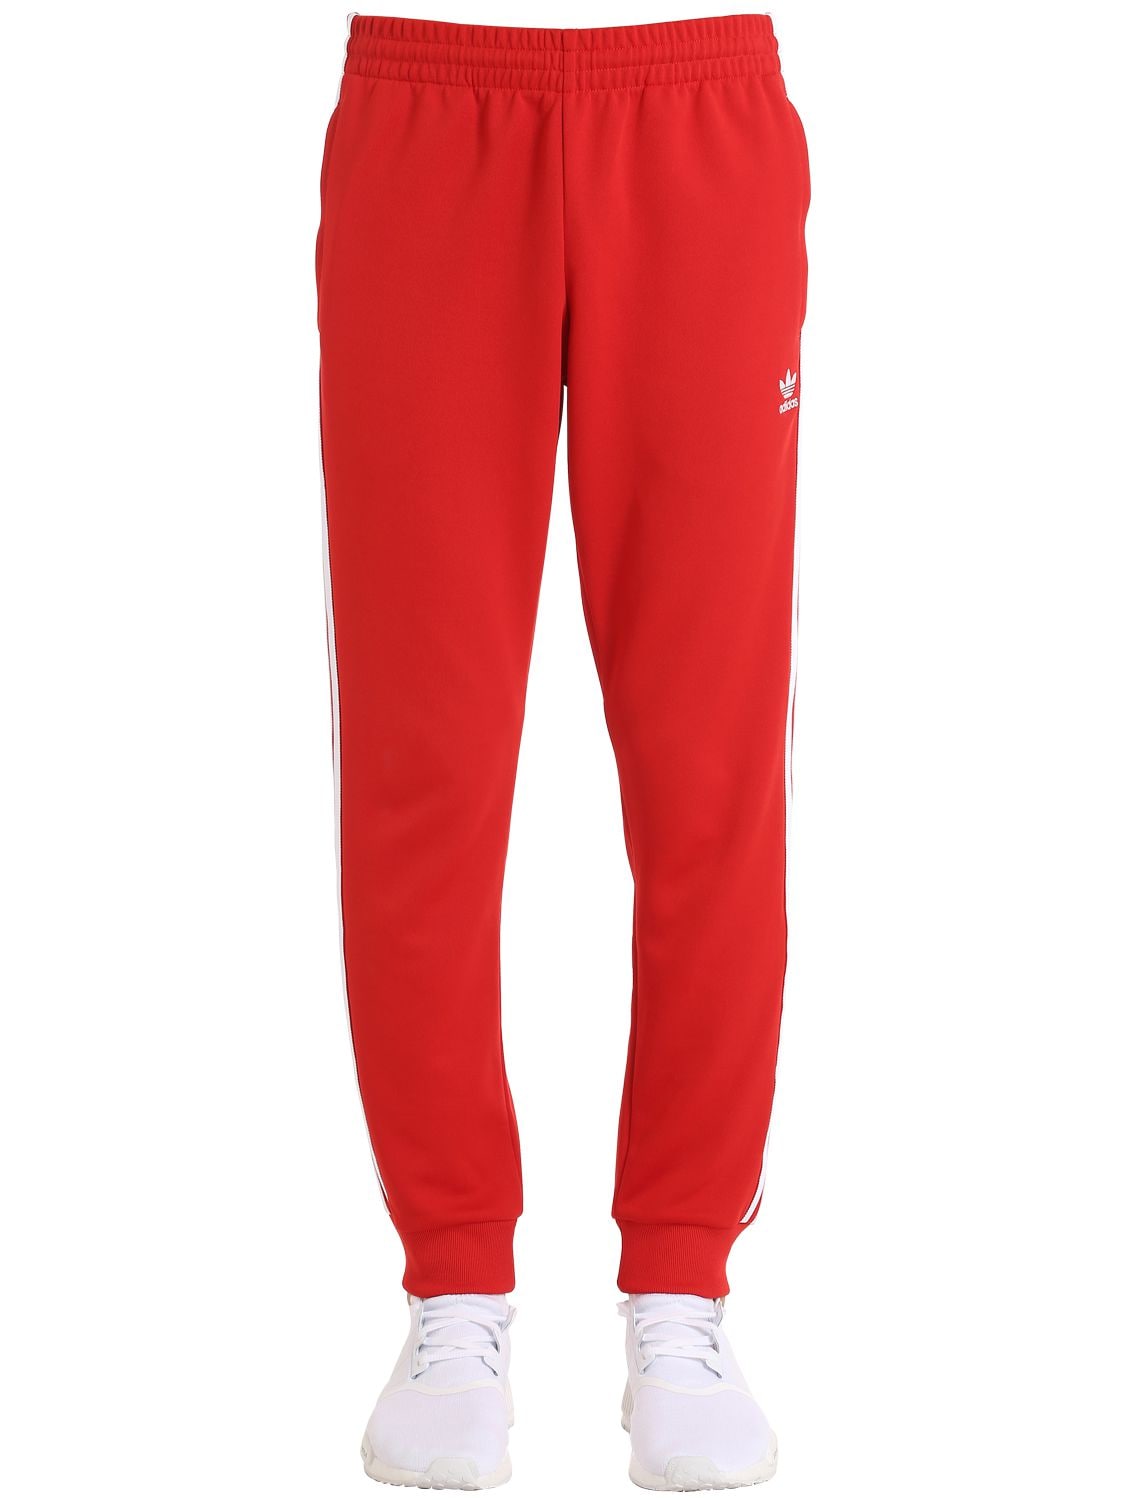 Adidas Originals Sst Shiny Tricot Track Pants In Red | ModeSens